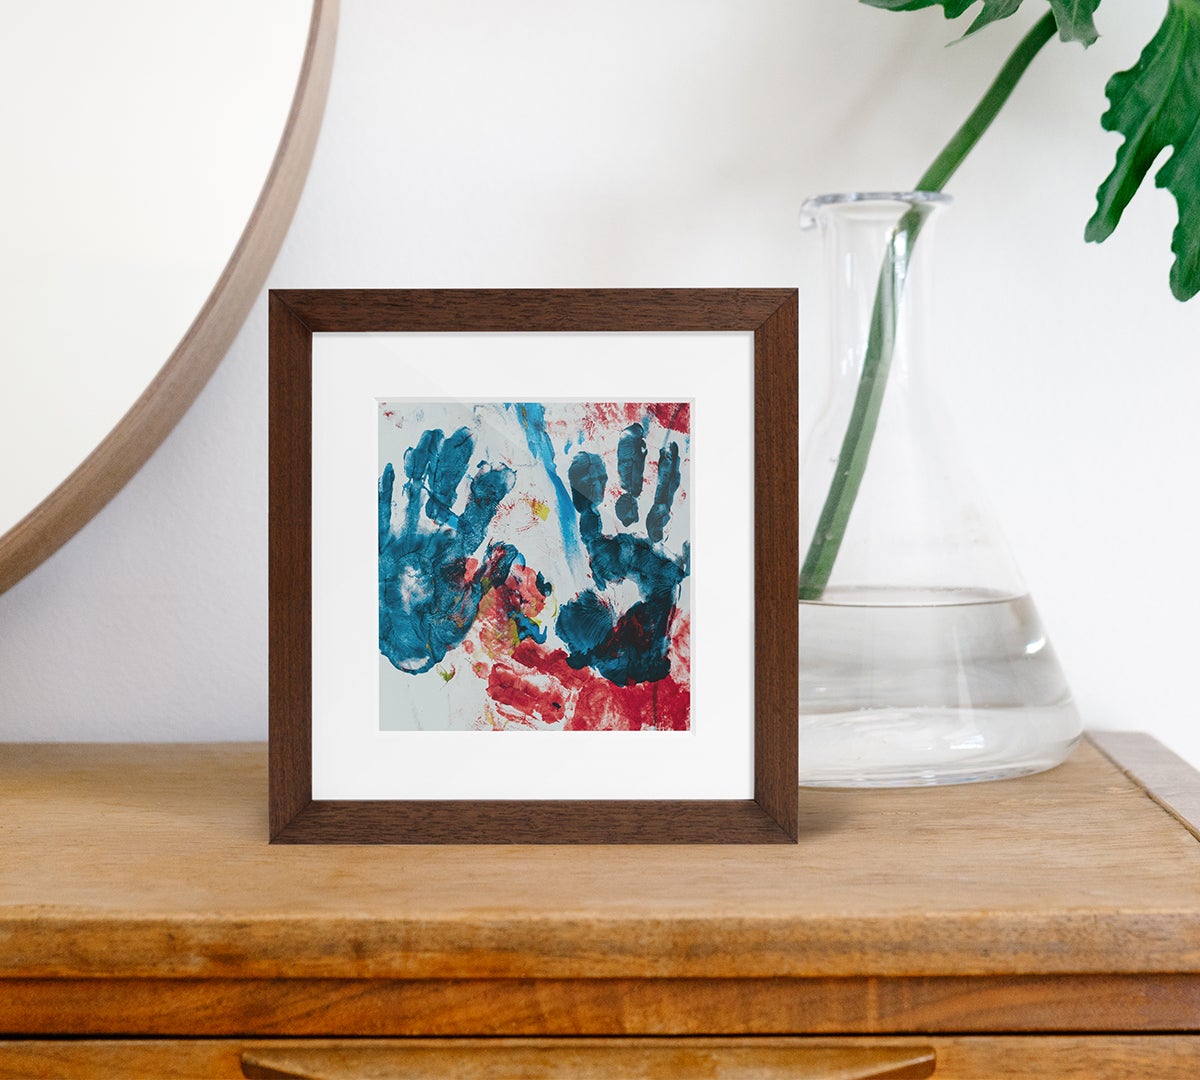 Artifact Uprising Wooden Tabletop frame in walnut finish featuring children's handprints in paint on dresser next to mirror and plant